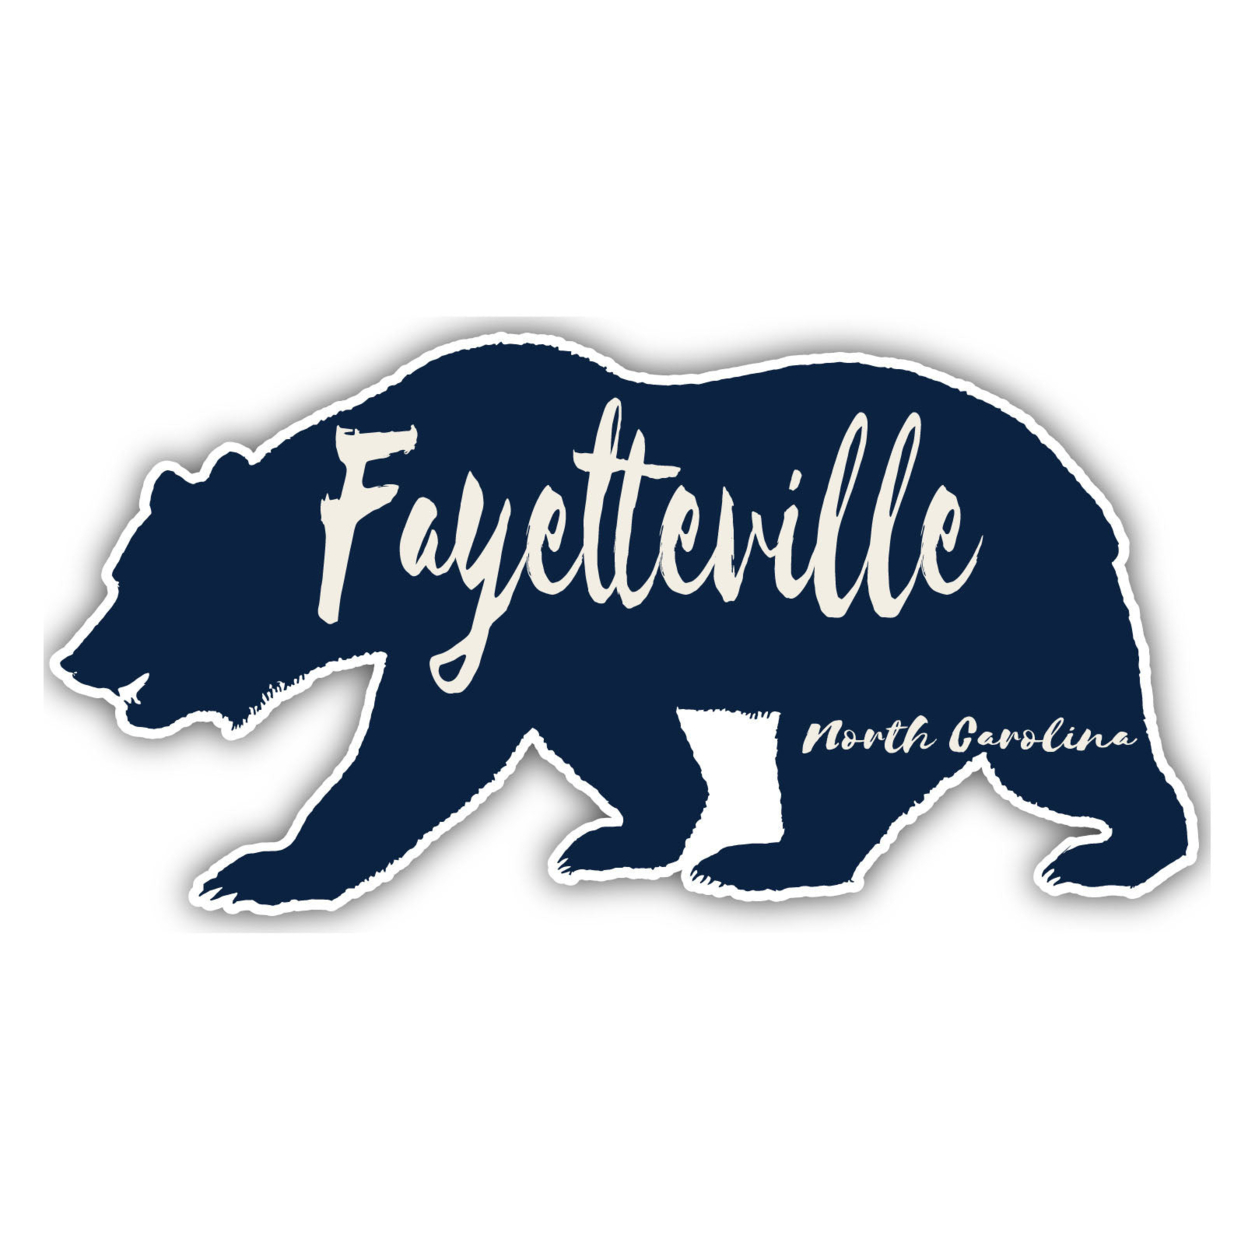 Fayetteville North Carolina Souvenir Decorative Stickers (Choose Theme And Size) - 4-Pack, 4-Inch, Camp Life